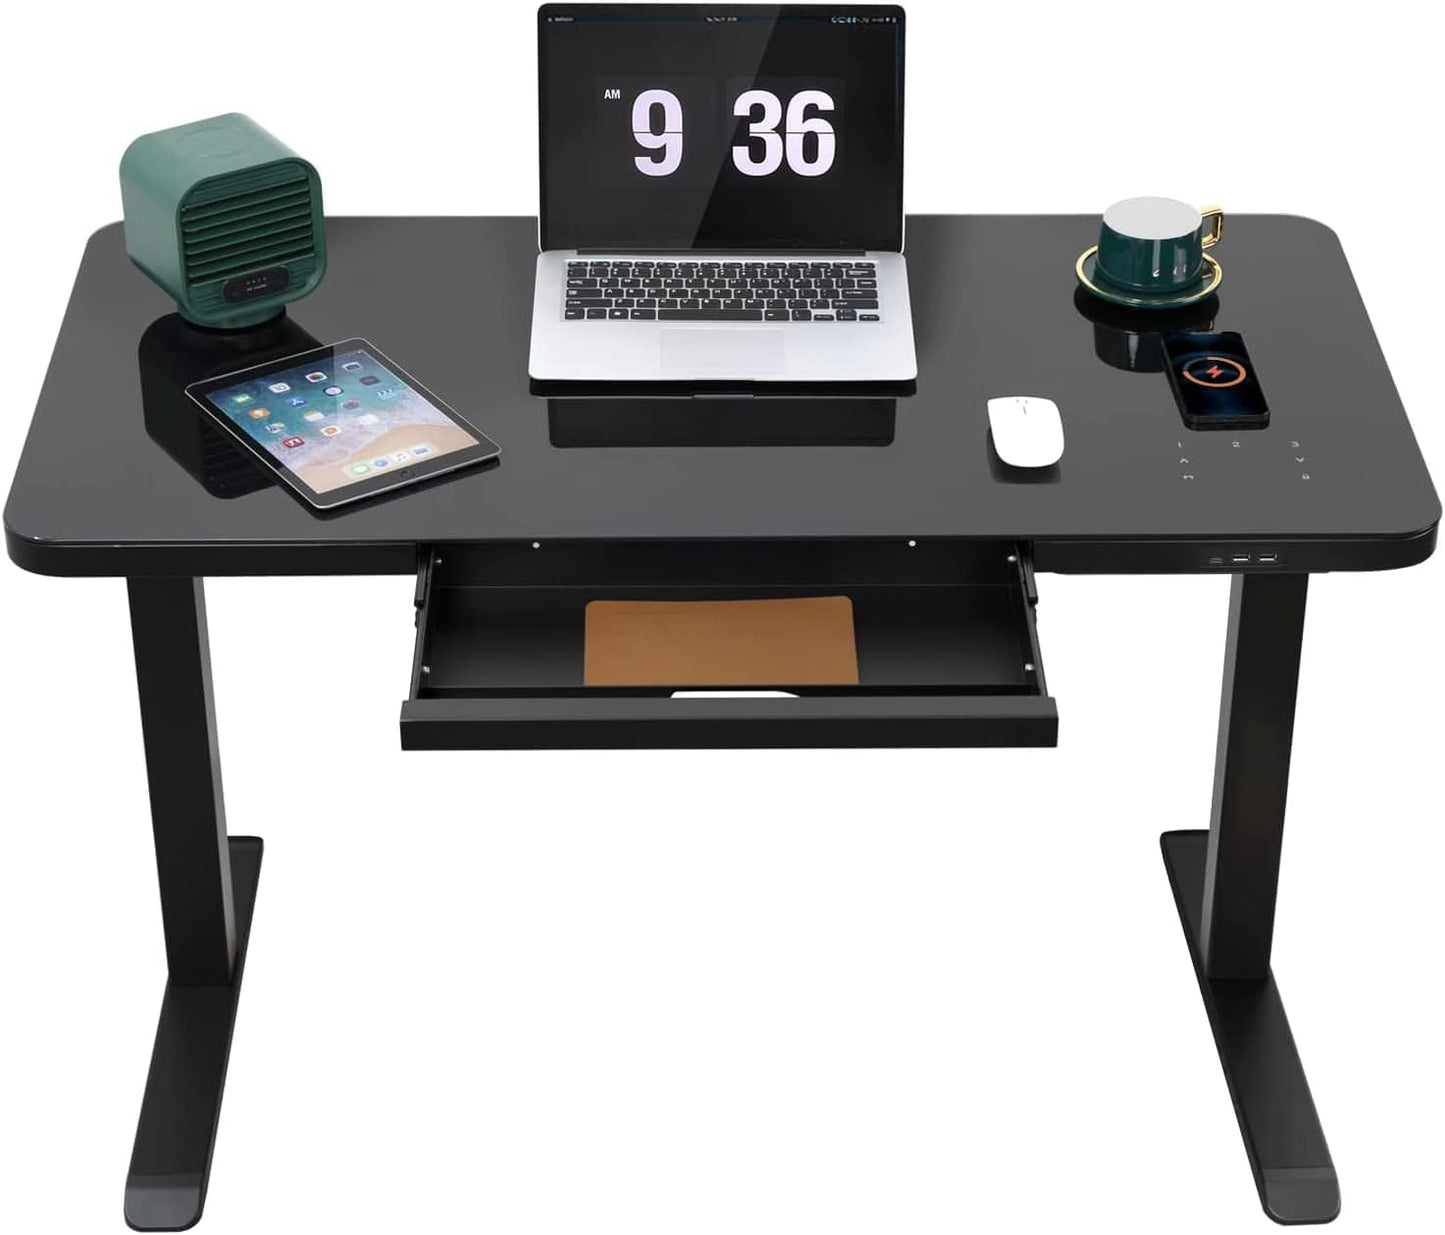 StandUp Desk Depot Black / Type2 Glass Electric Standing Desk Drawers Charging USB Port 45 X 23 Inch Dual Motor Electric Height Adjustable Desk Sit Stand Desk New